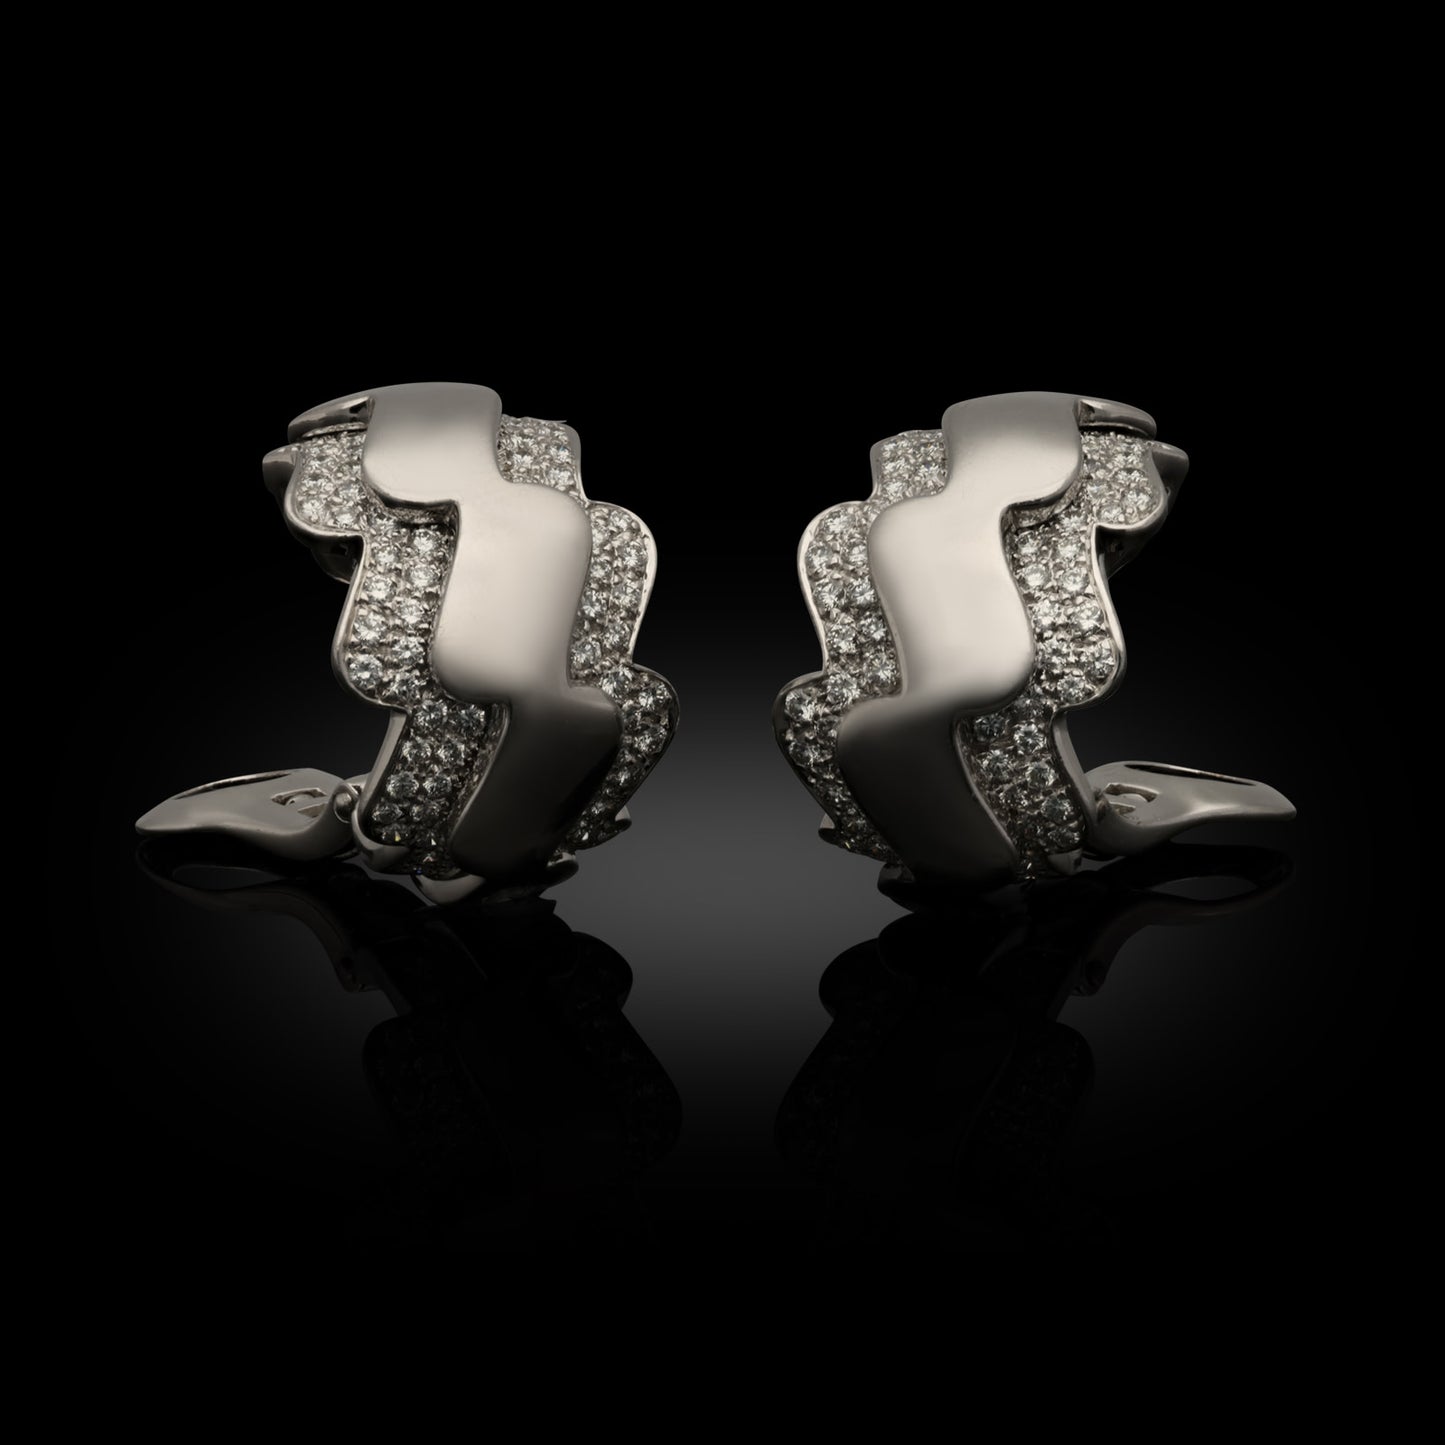 French Van Cleef & Arpels Post-1980s 18KT White Gold Diamond Wave Hoop Earrings front view